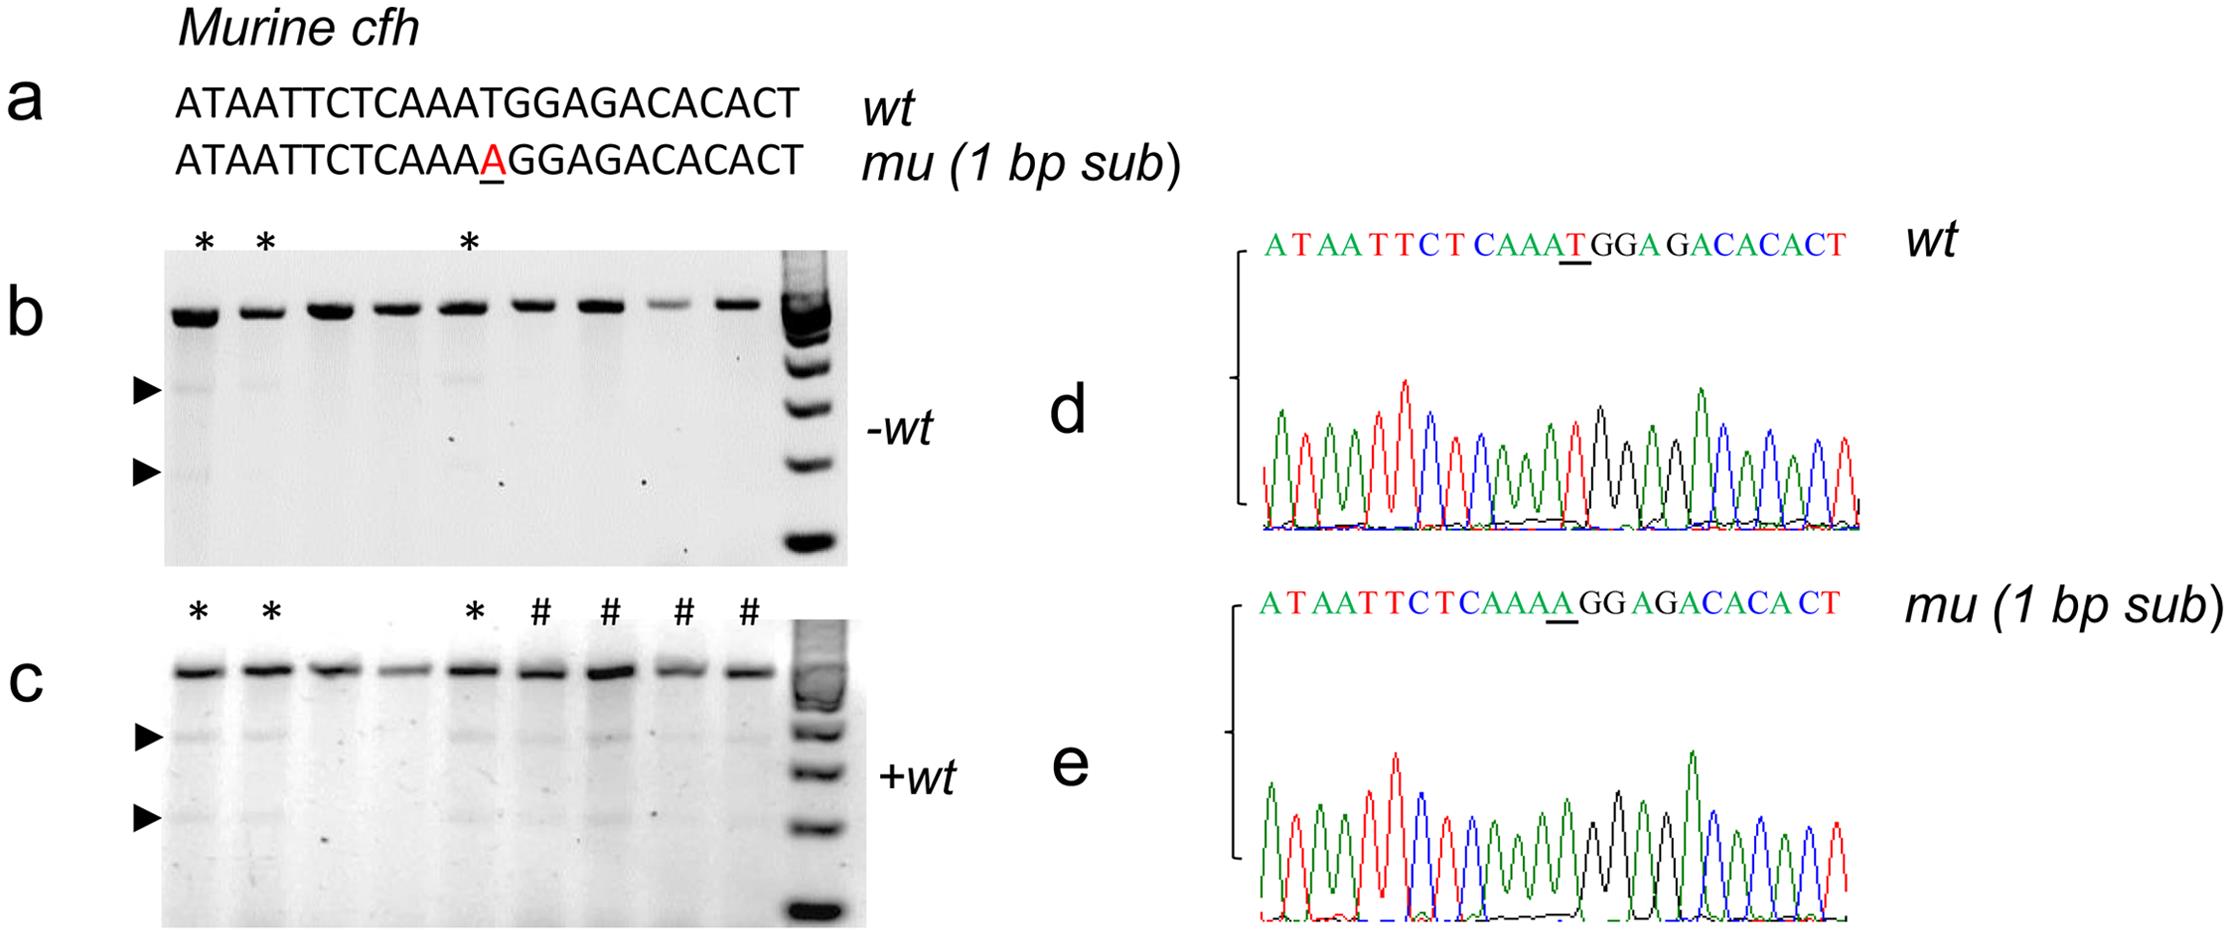 Genotyping wild-type, heterozygous, and homozygous mice with a single nucleotide substitution in <italic>cfh</italic>.